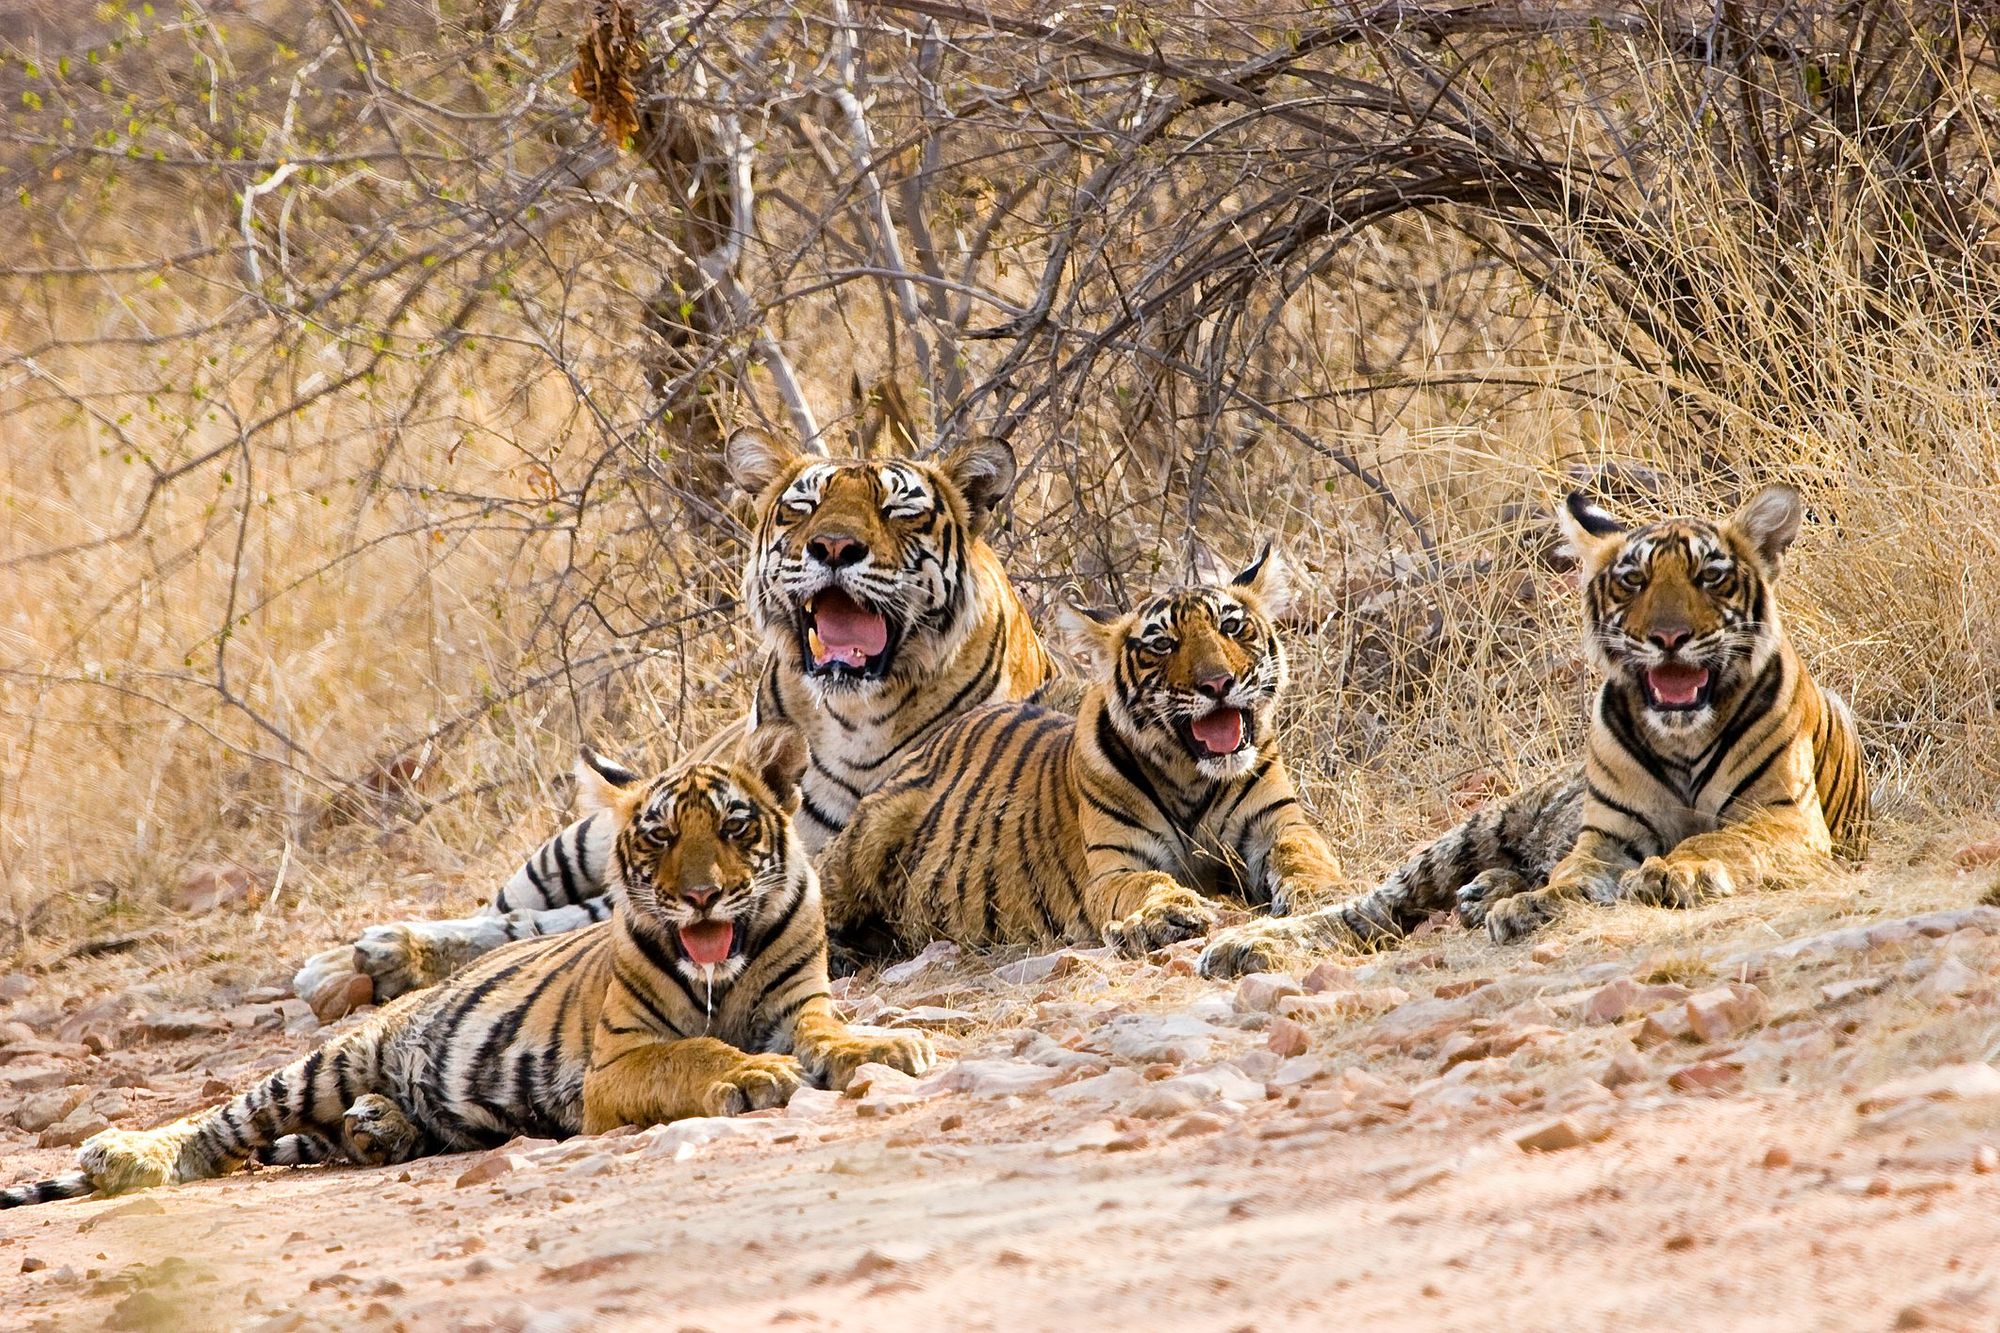 A tiger with her three cubs in Ranthambore National Park, India